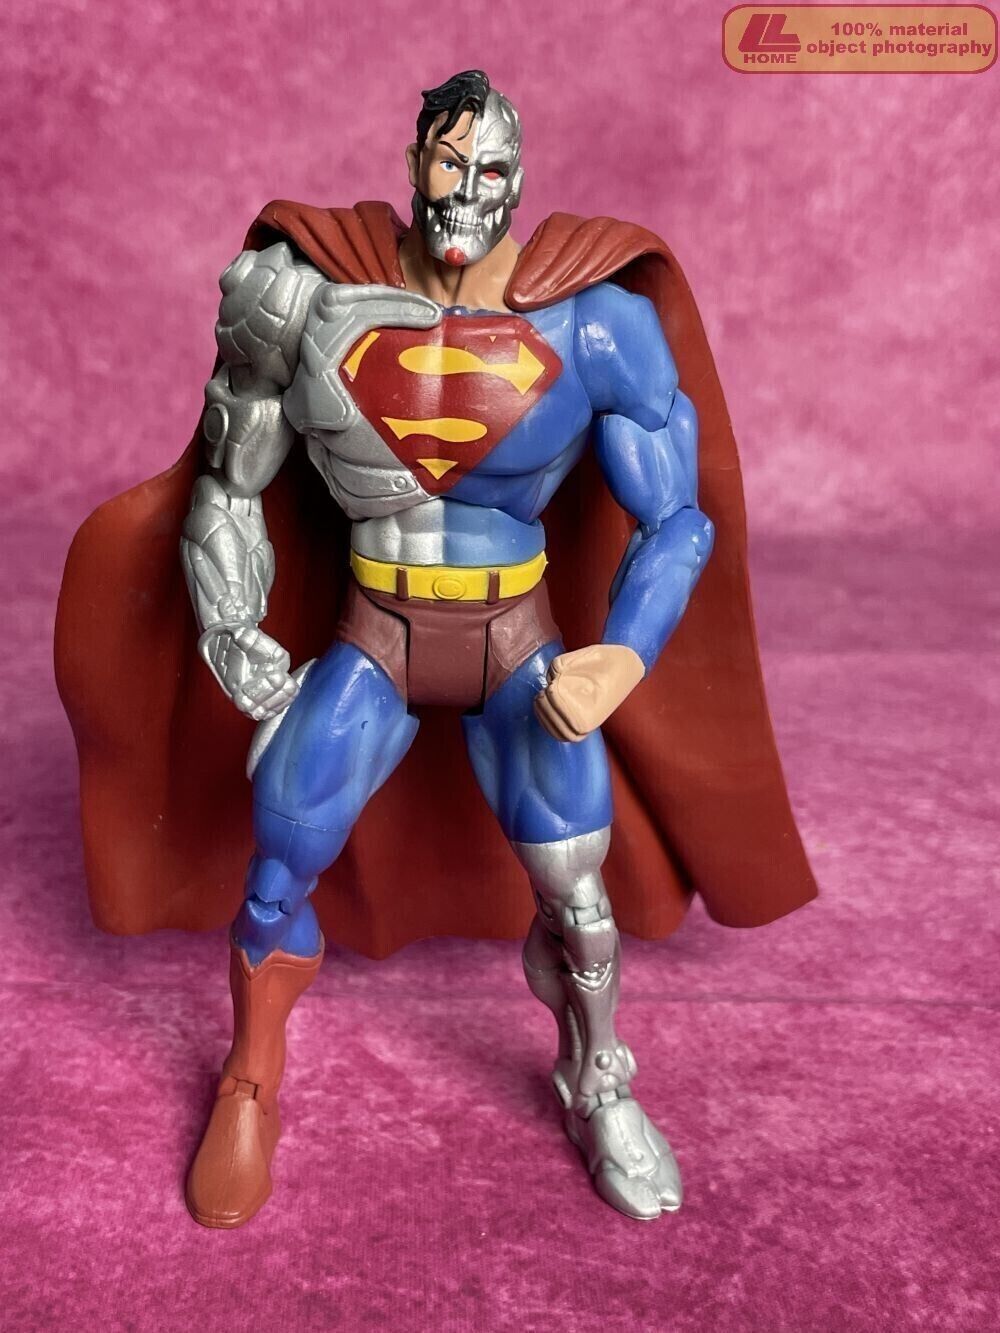 Anime character CYBORG SUPERMAN Super Hero Action Figure Statue Toy Gift